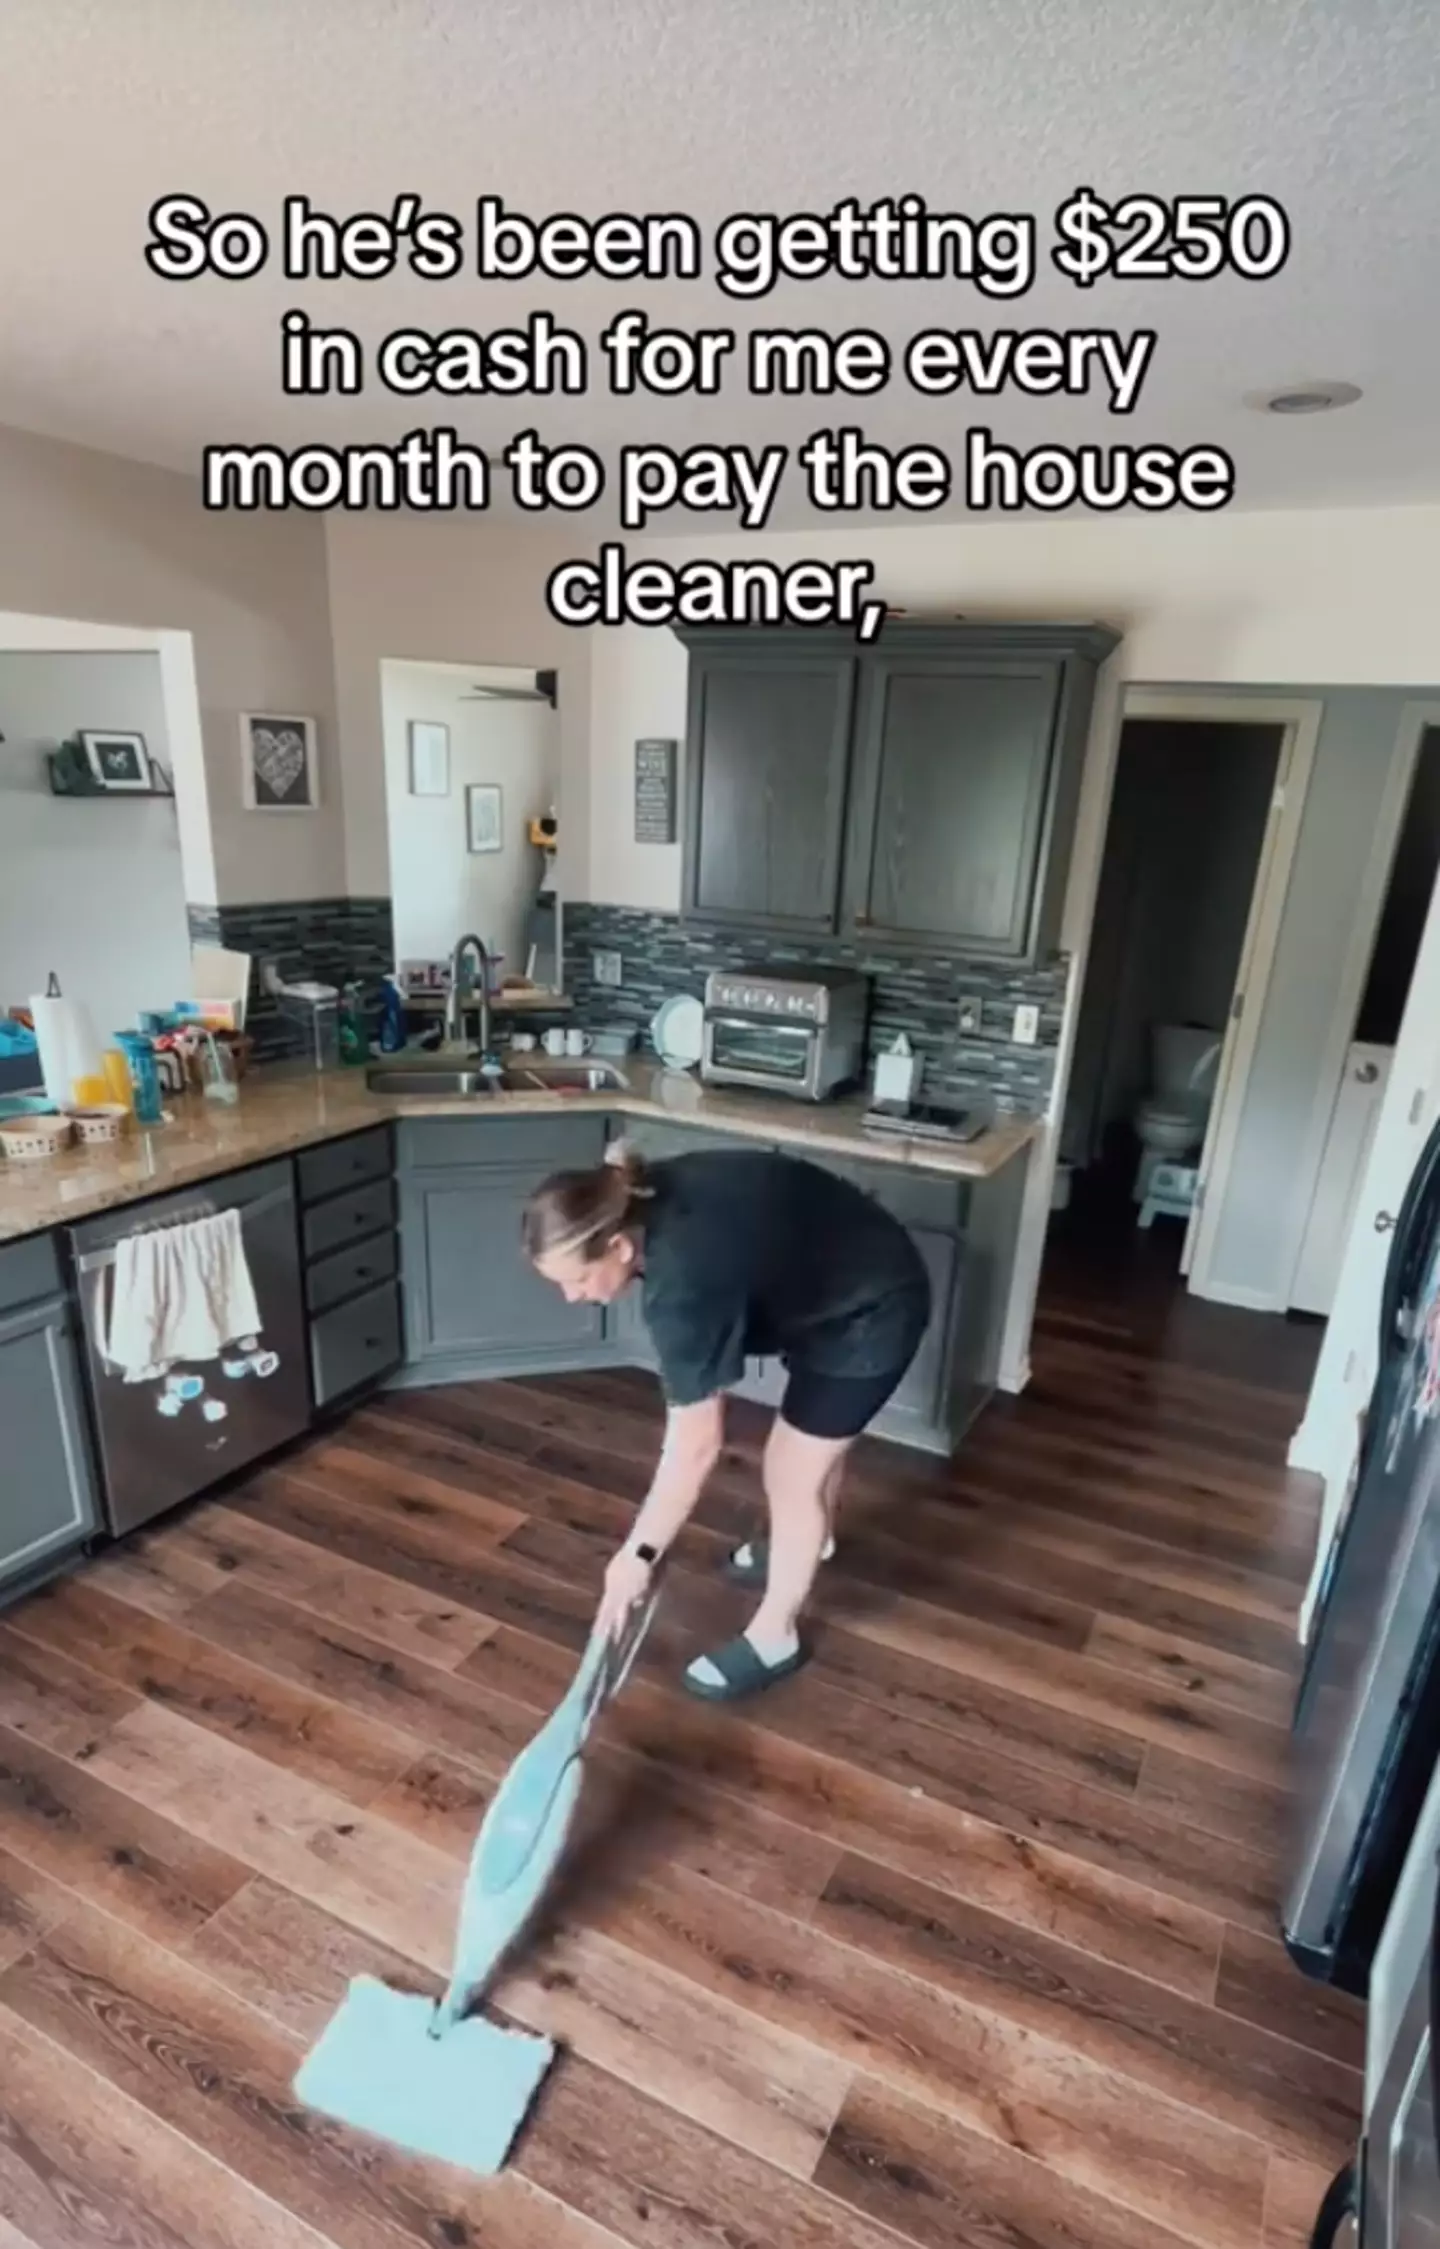 The woman explained how she charges her husband $250 a month for her cleaning services - but he doesn't have a clue it's actually her.